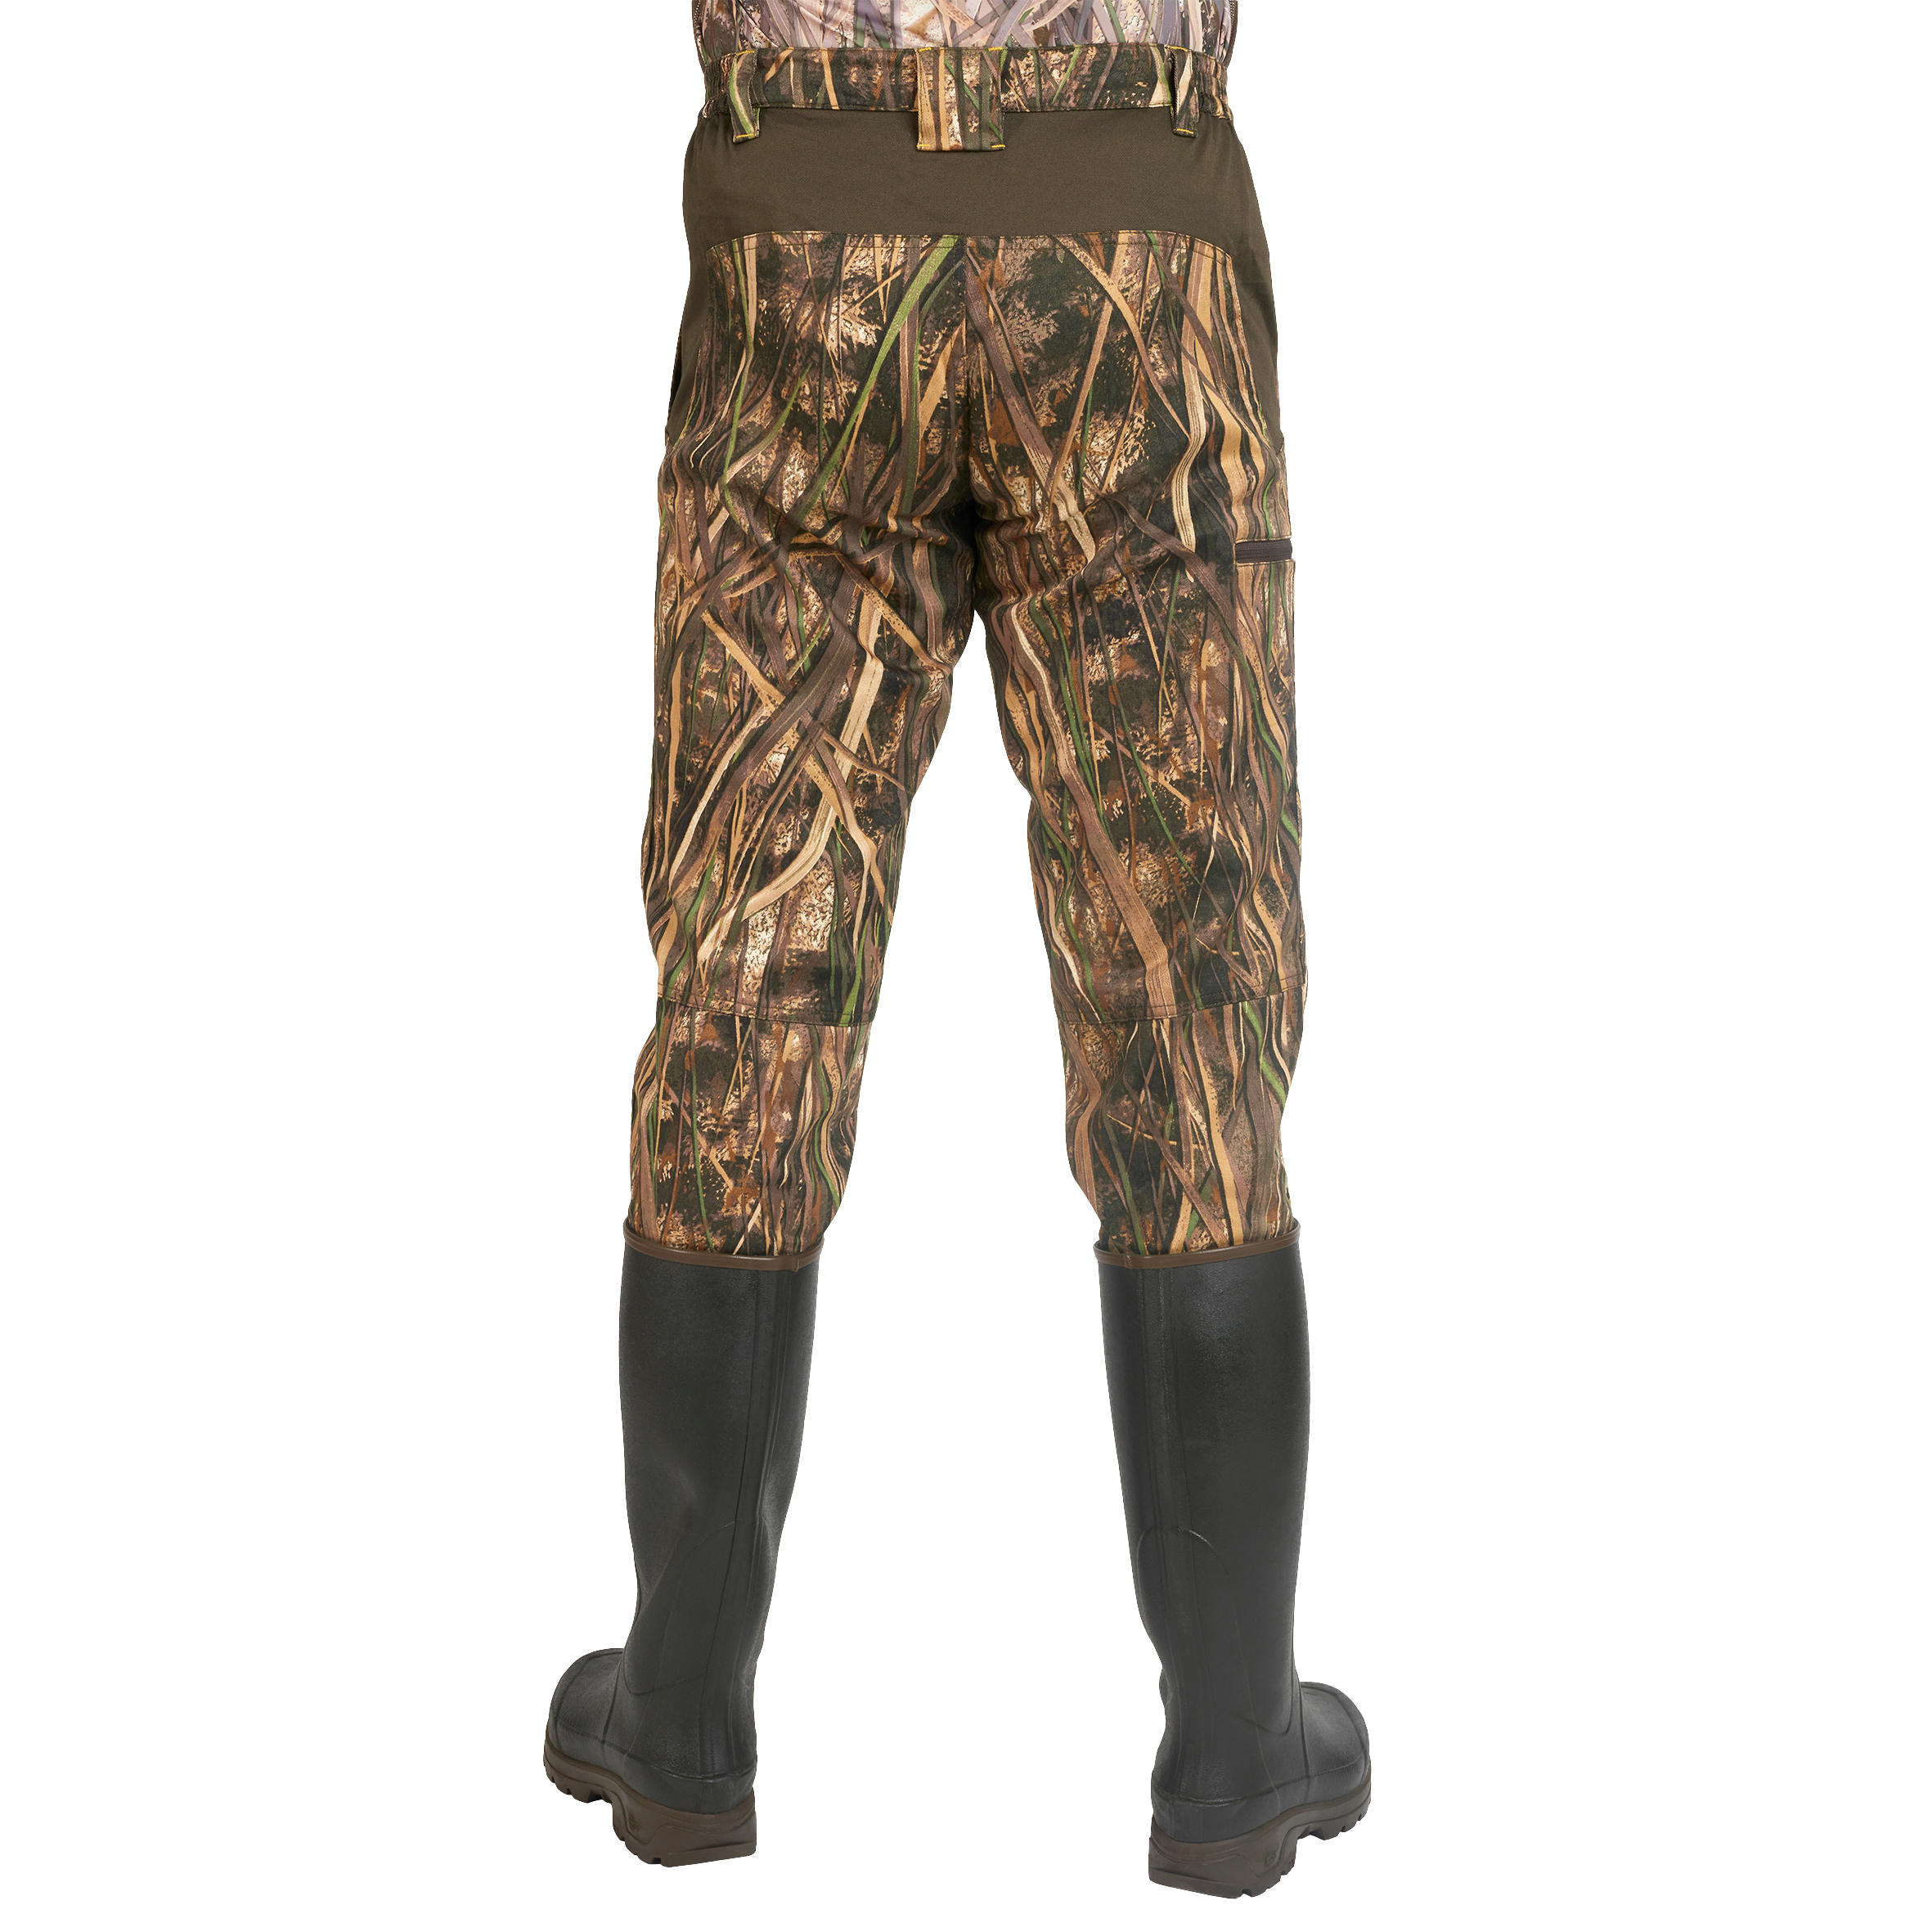 500 Light Country Sport Trousers - Wetlands Camo 4/11